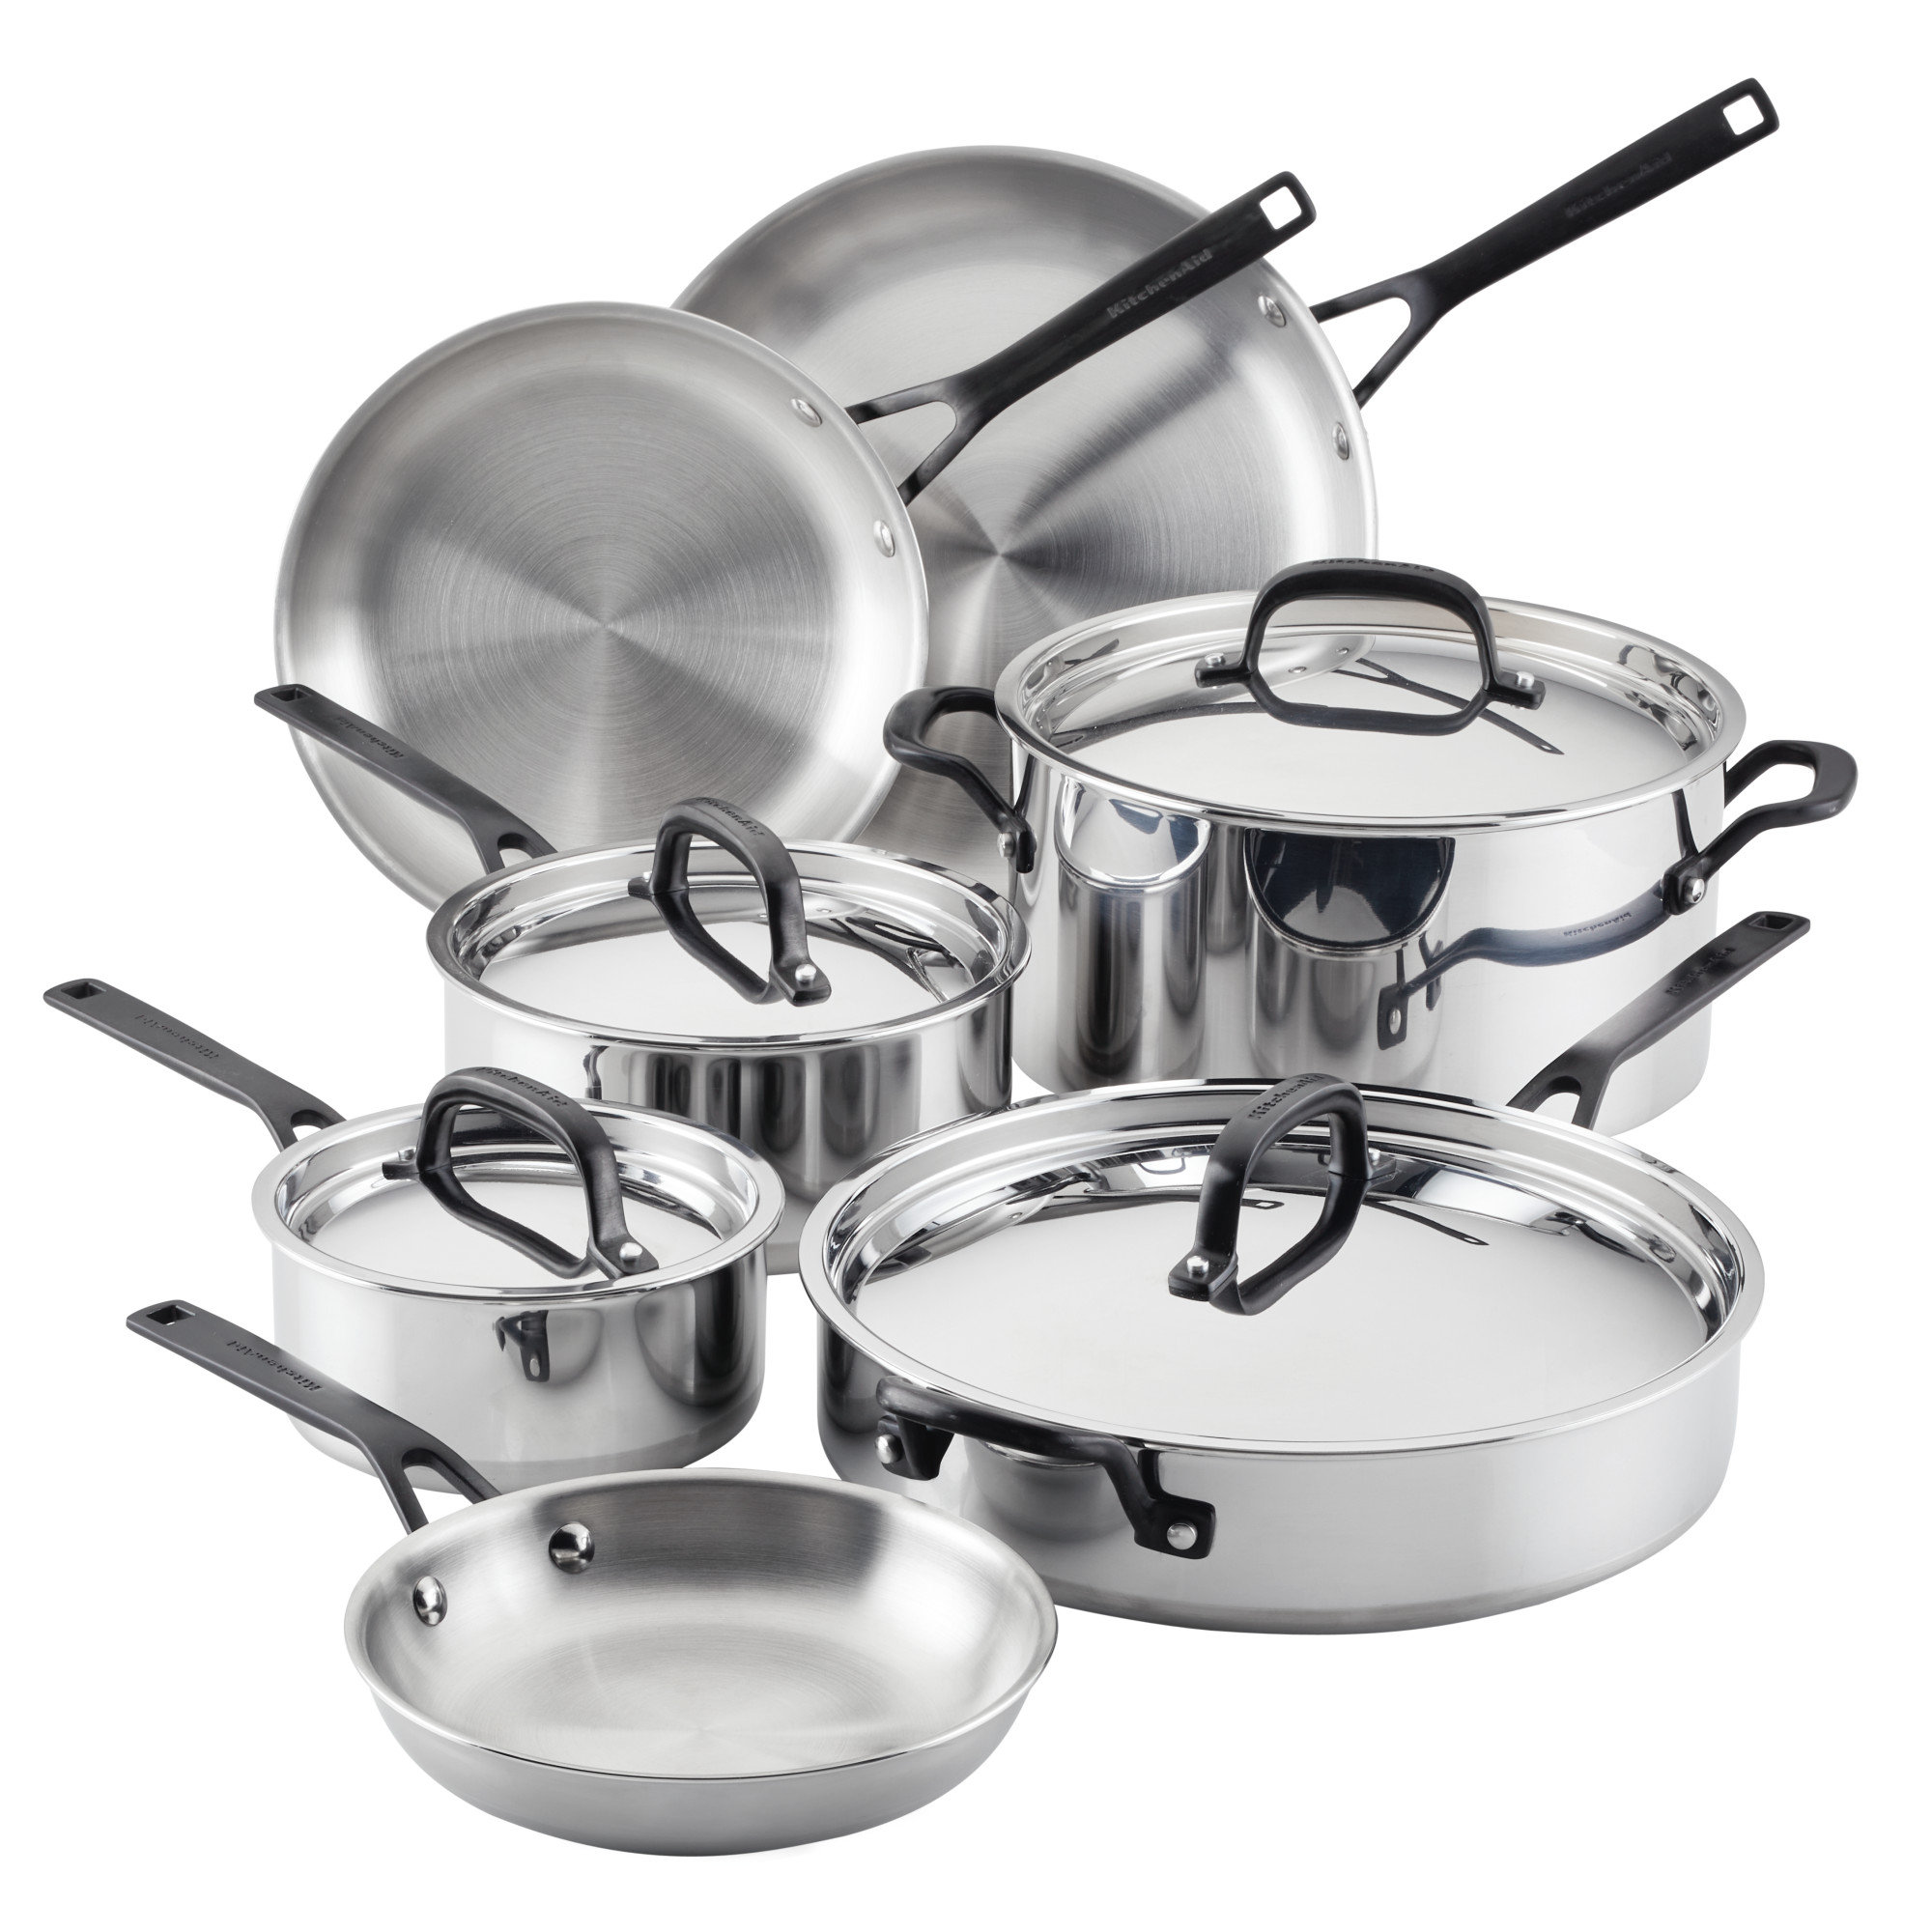 KitchenAid 5-Ply Clad Polished 10 Piece Stainless Steel Cookware Pots